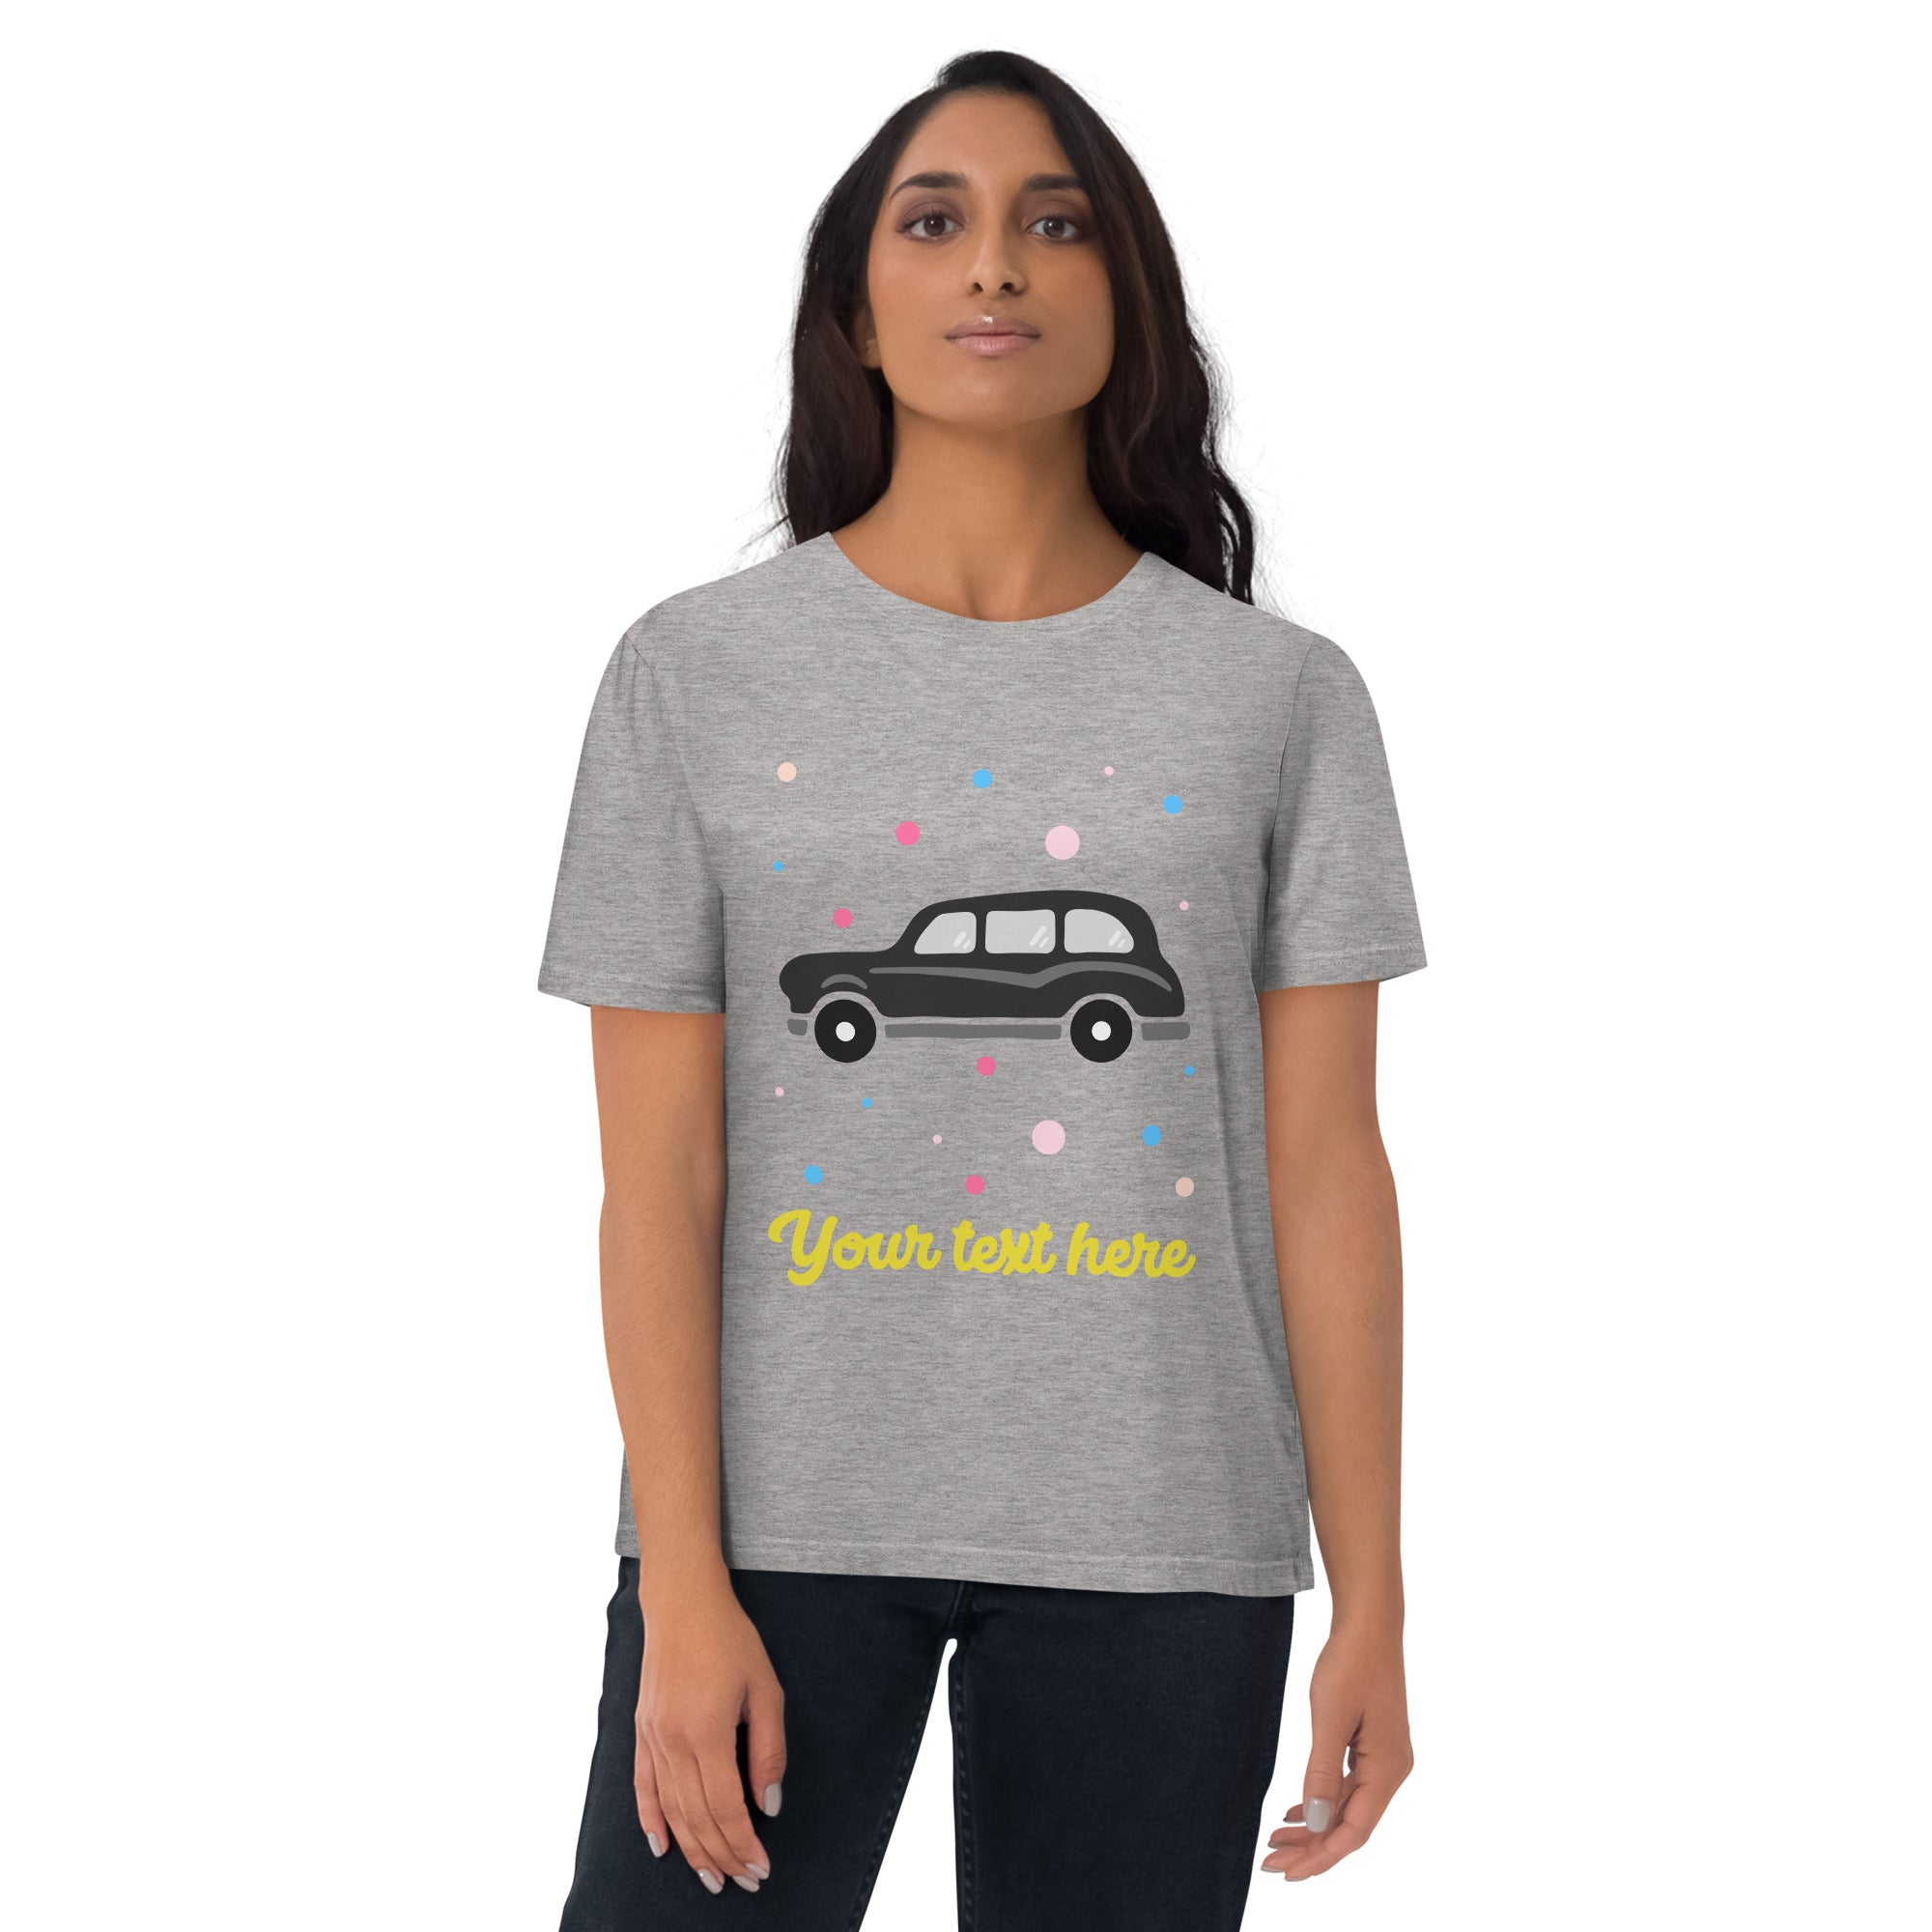 Personalised Custom Text - Organic Cotton Adults Unisex T-Shirt - London Doodles - Black Taxi - Heather Grey 2